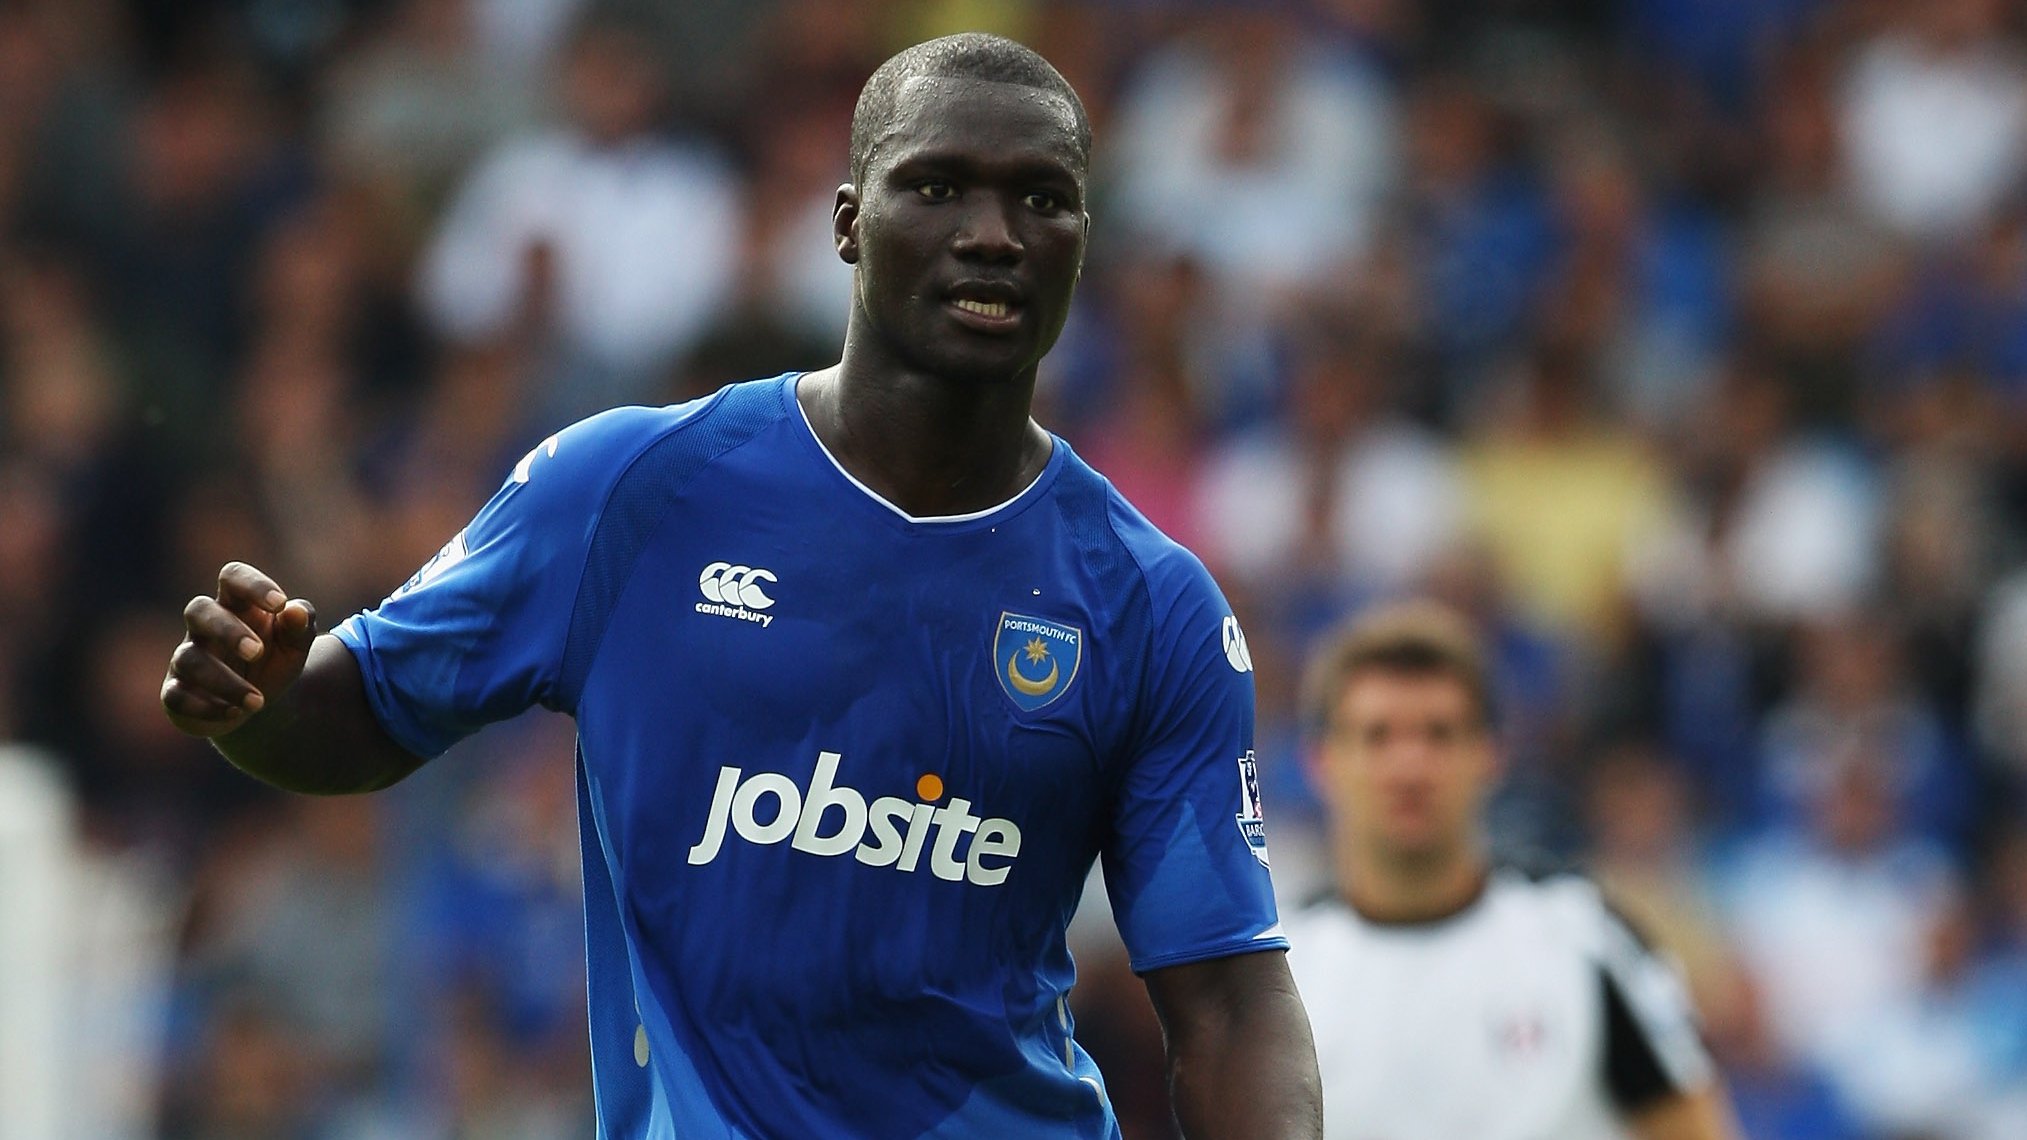 Portsmouth FA Cup winner Papa Bouba Diop dies aged 42 - HampshireLive